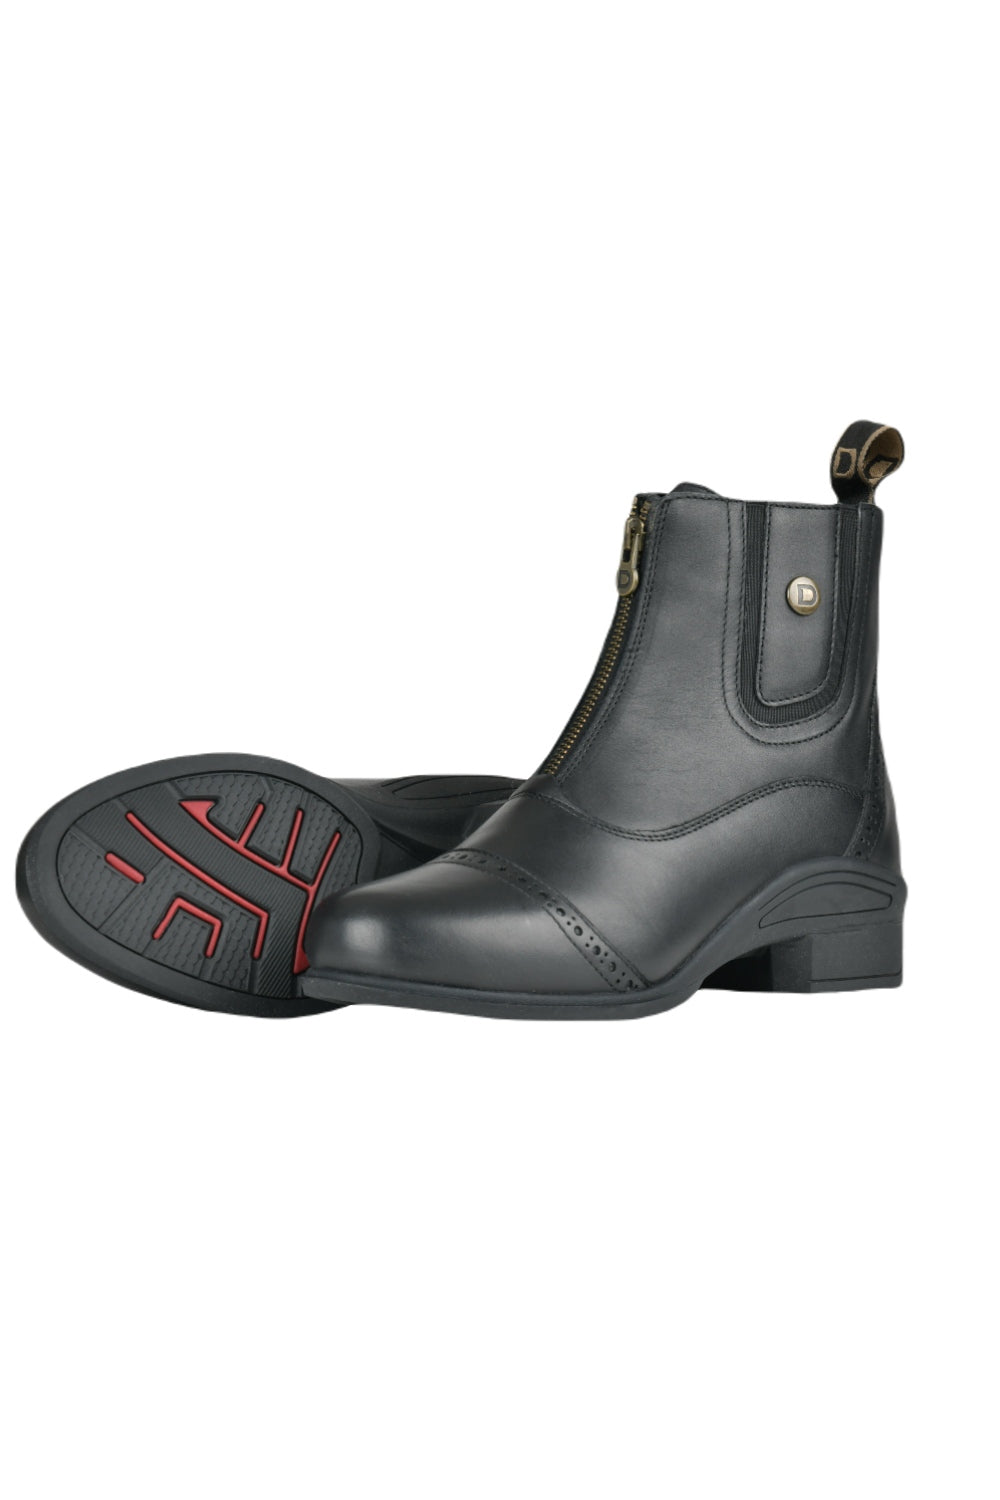 Dublin Eminence Insulated Zip Paddock Boots In Black 